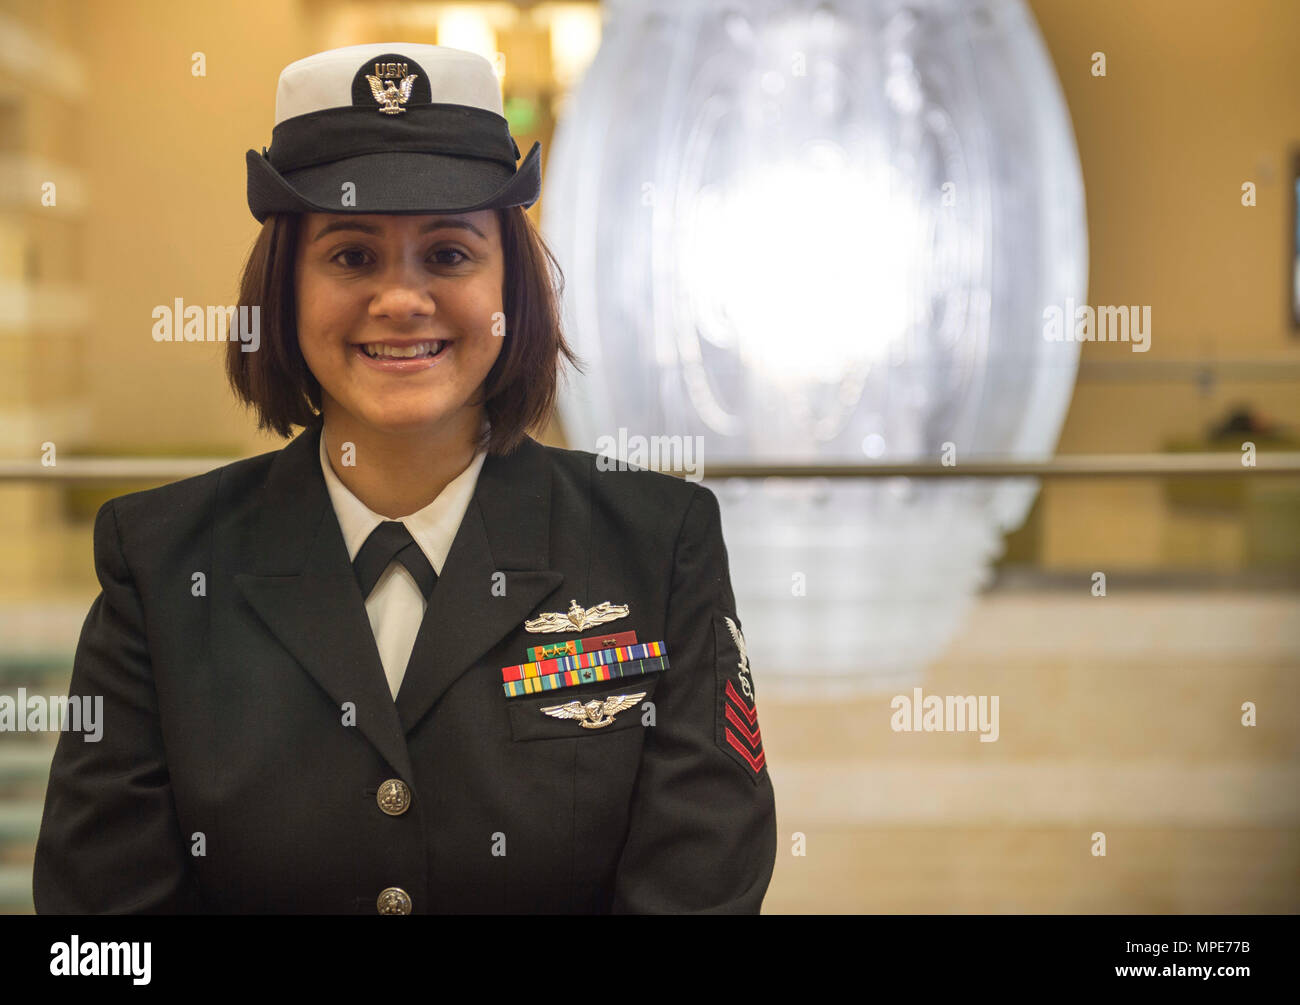 170206-N-VC599-085 VIRGINIA BEACH, Va. (Feb. 6, 2017) Operations Specialist First Class Ciria Howe, representing Afloat Training Group Atlantic, poses for a portrait during Sailor of the Year (SOY) week. The SOY program was established in 1972 by Chief of Naval Operations Adm. Elmo Zumwalt and Master Chief Petty Officer of the Navy John Whittet to recognize an individual Sailor who best represented the ever-growing group of dedicated professional Sailors at each command and ultimately the Navy. The SURFLANT Sea and Shore SOY selected at the end of this week will advance to compete for SOY at U Stock Photo